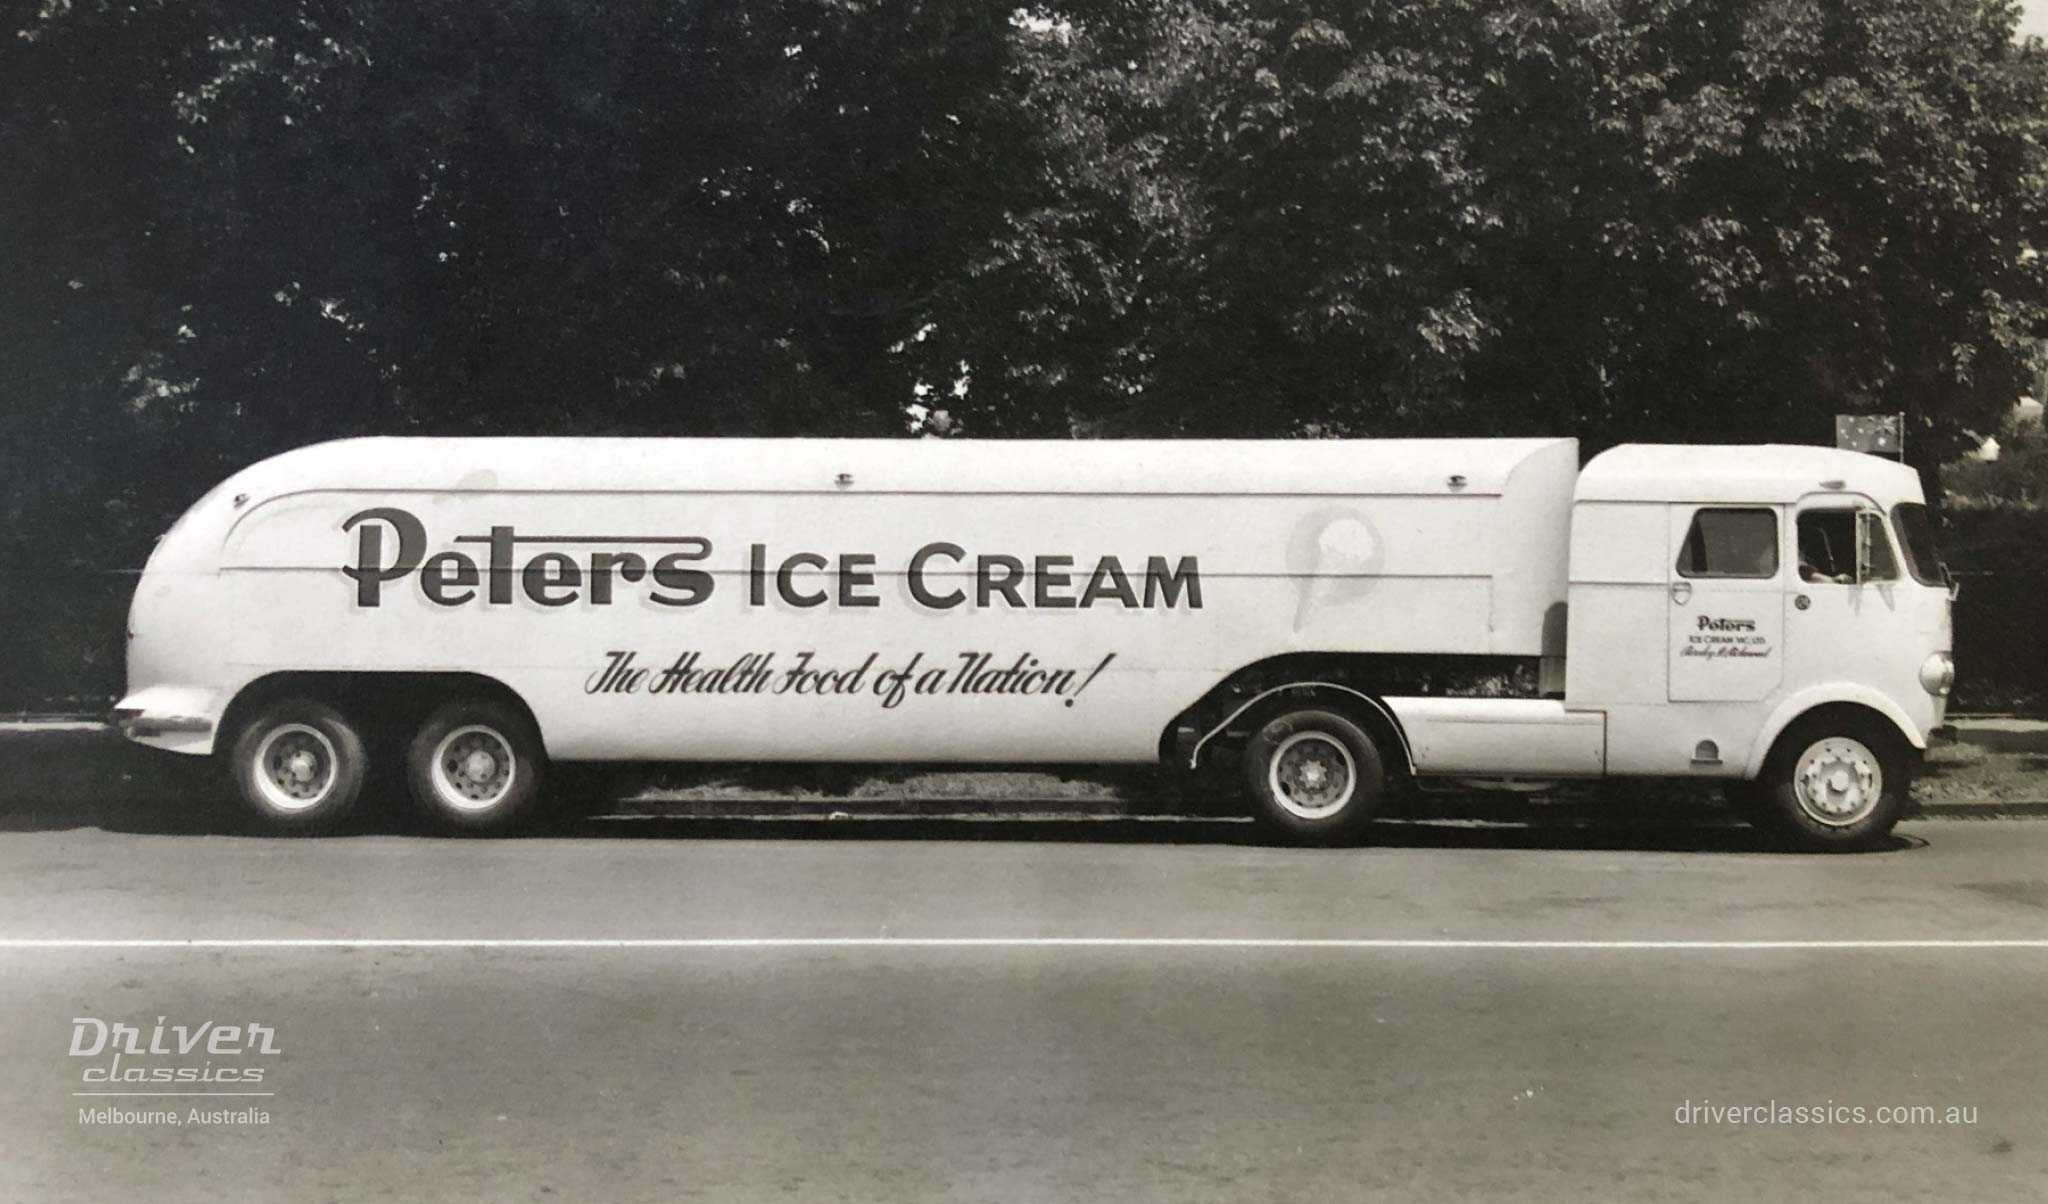 1950s Ansair truck for Peters Ice Cream with Flxible Clipper styling features, side profile